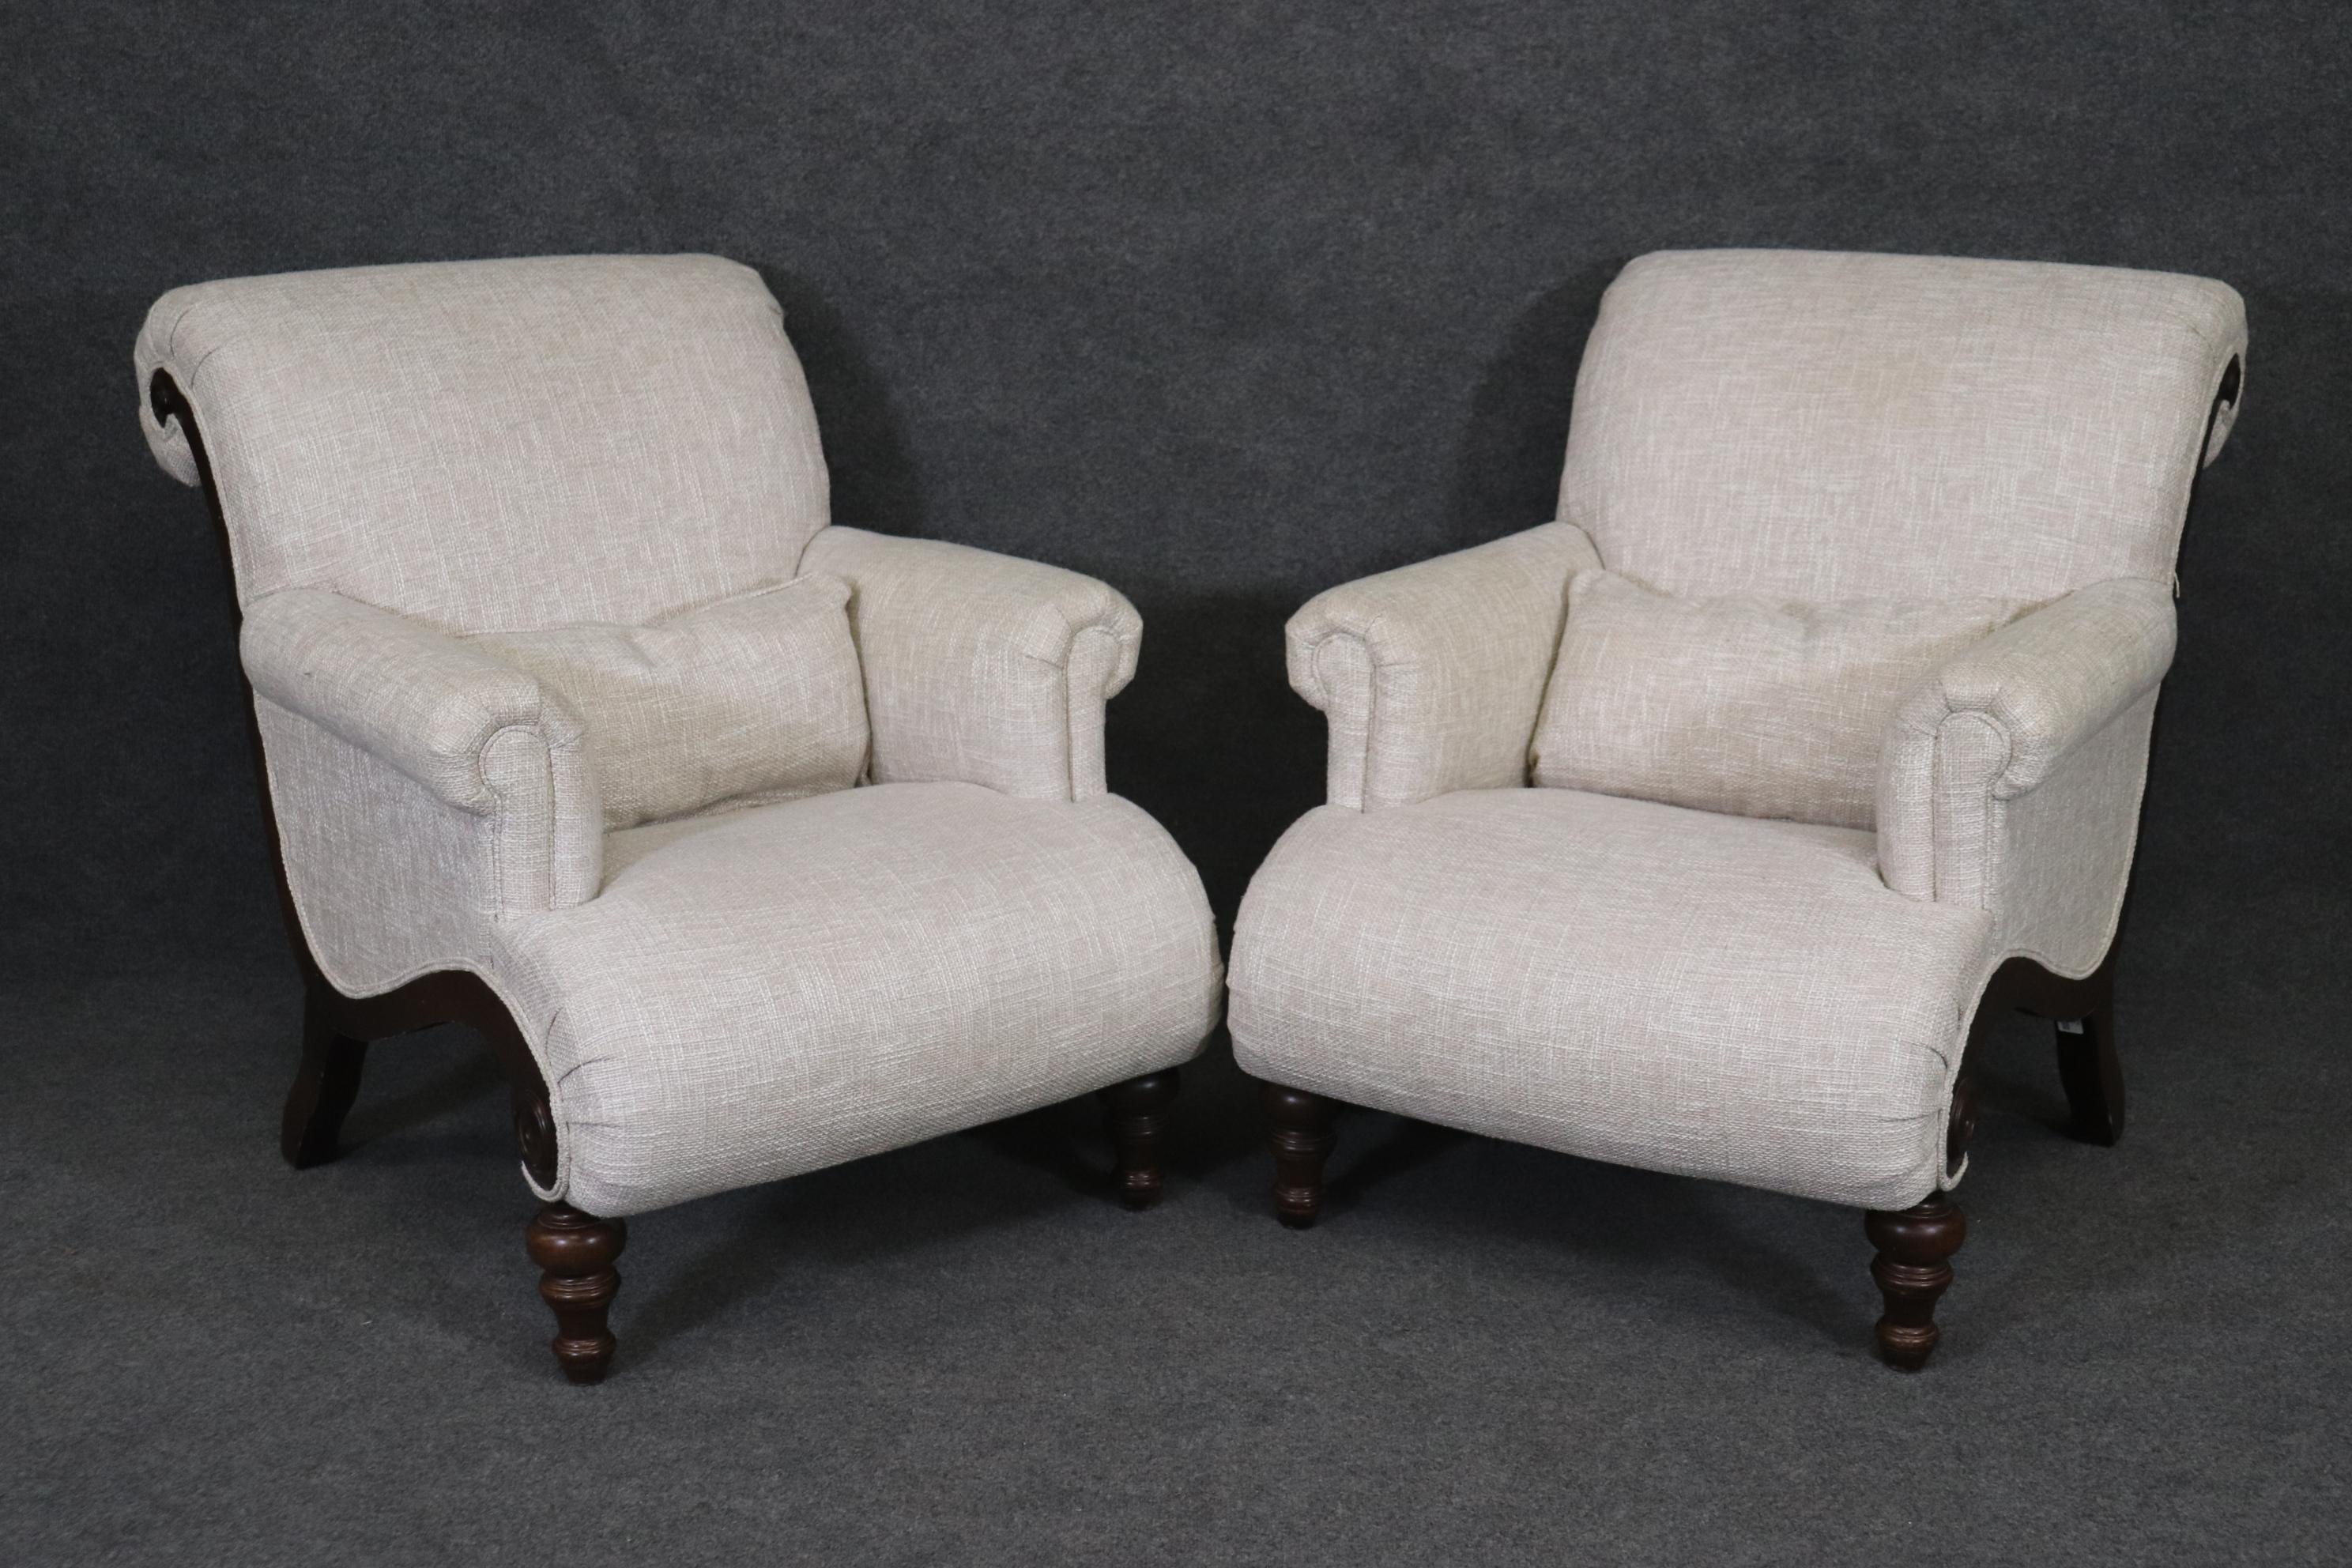 This is a very beautiful complete set of 4 pieces including two armchairs and two ottomans in an off-white wide large patter linen upholstery. The upholstery is like linen but larger woven spaces. The set is in good condition and dates to 2012 and